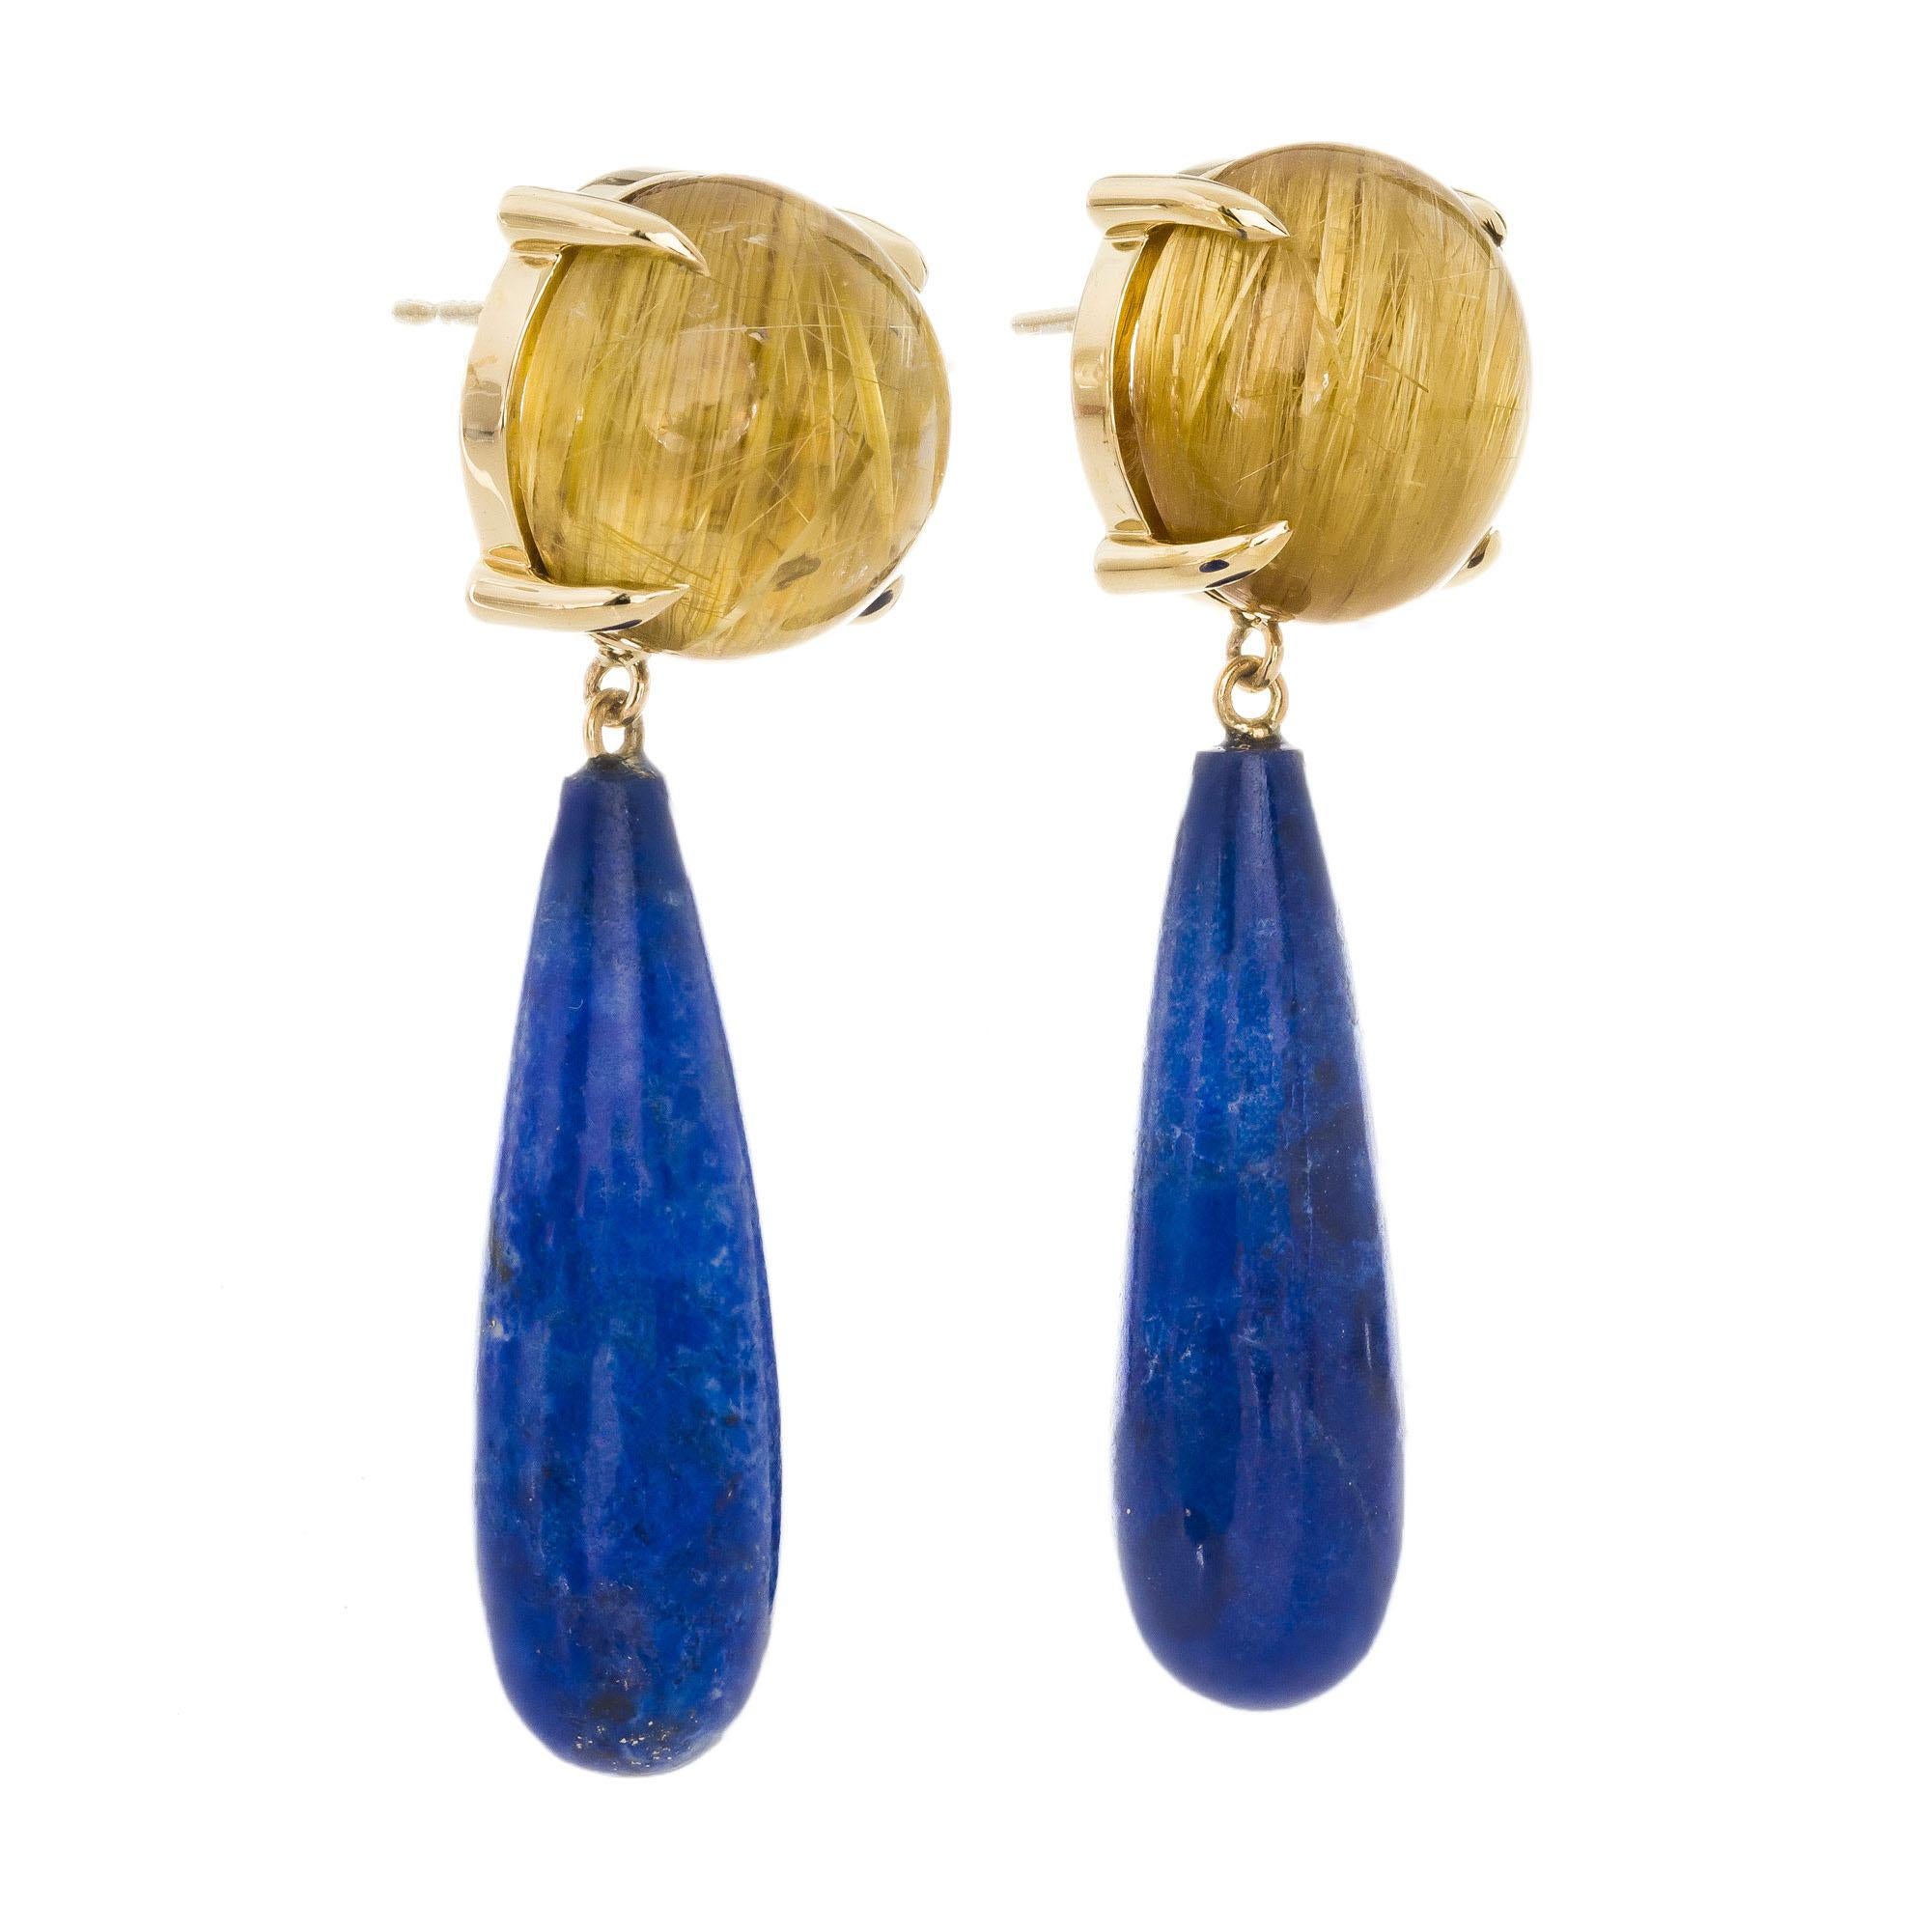 Natural untreated rutilated quartz and blue lapis dangle earrings. 2 round rutilated cabochon quartz with 2 royal blue lapis drops set in 14k yellow gold. Created in the Peter Suchy workshop.

2 round rutilated cabochon brownish yellow quartz,